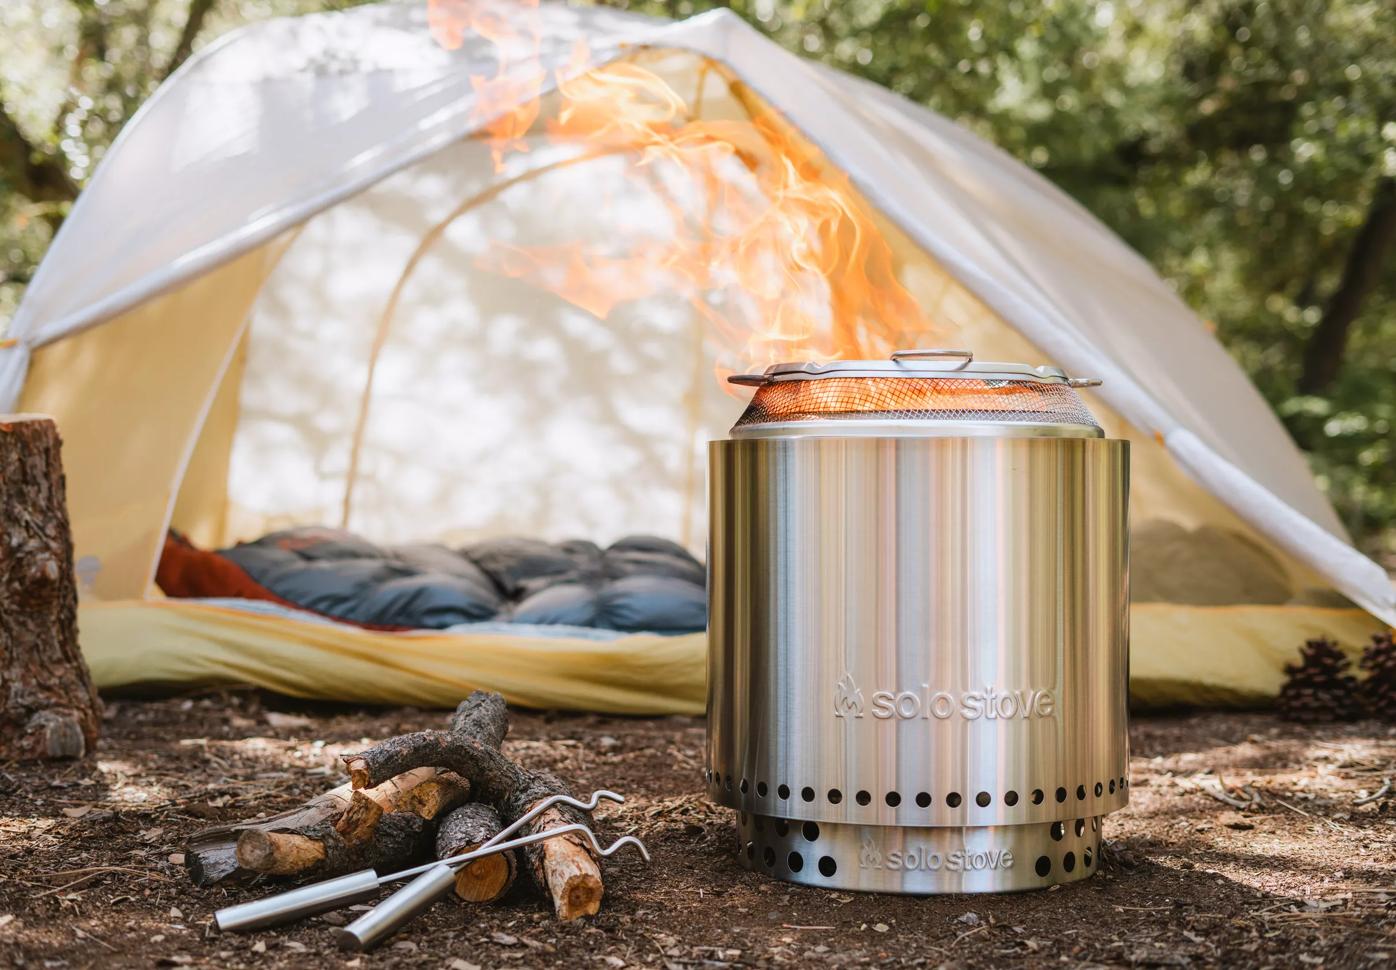 Solo Stove Ranger 2.0 Camping Fire Pit